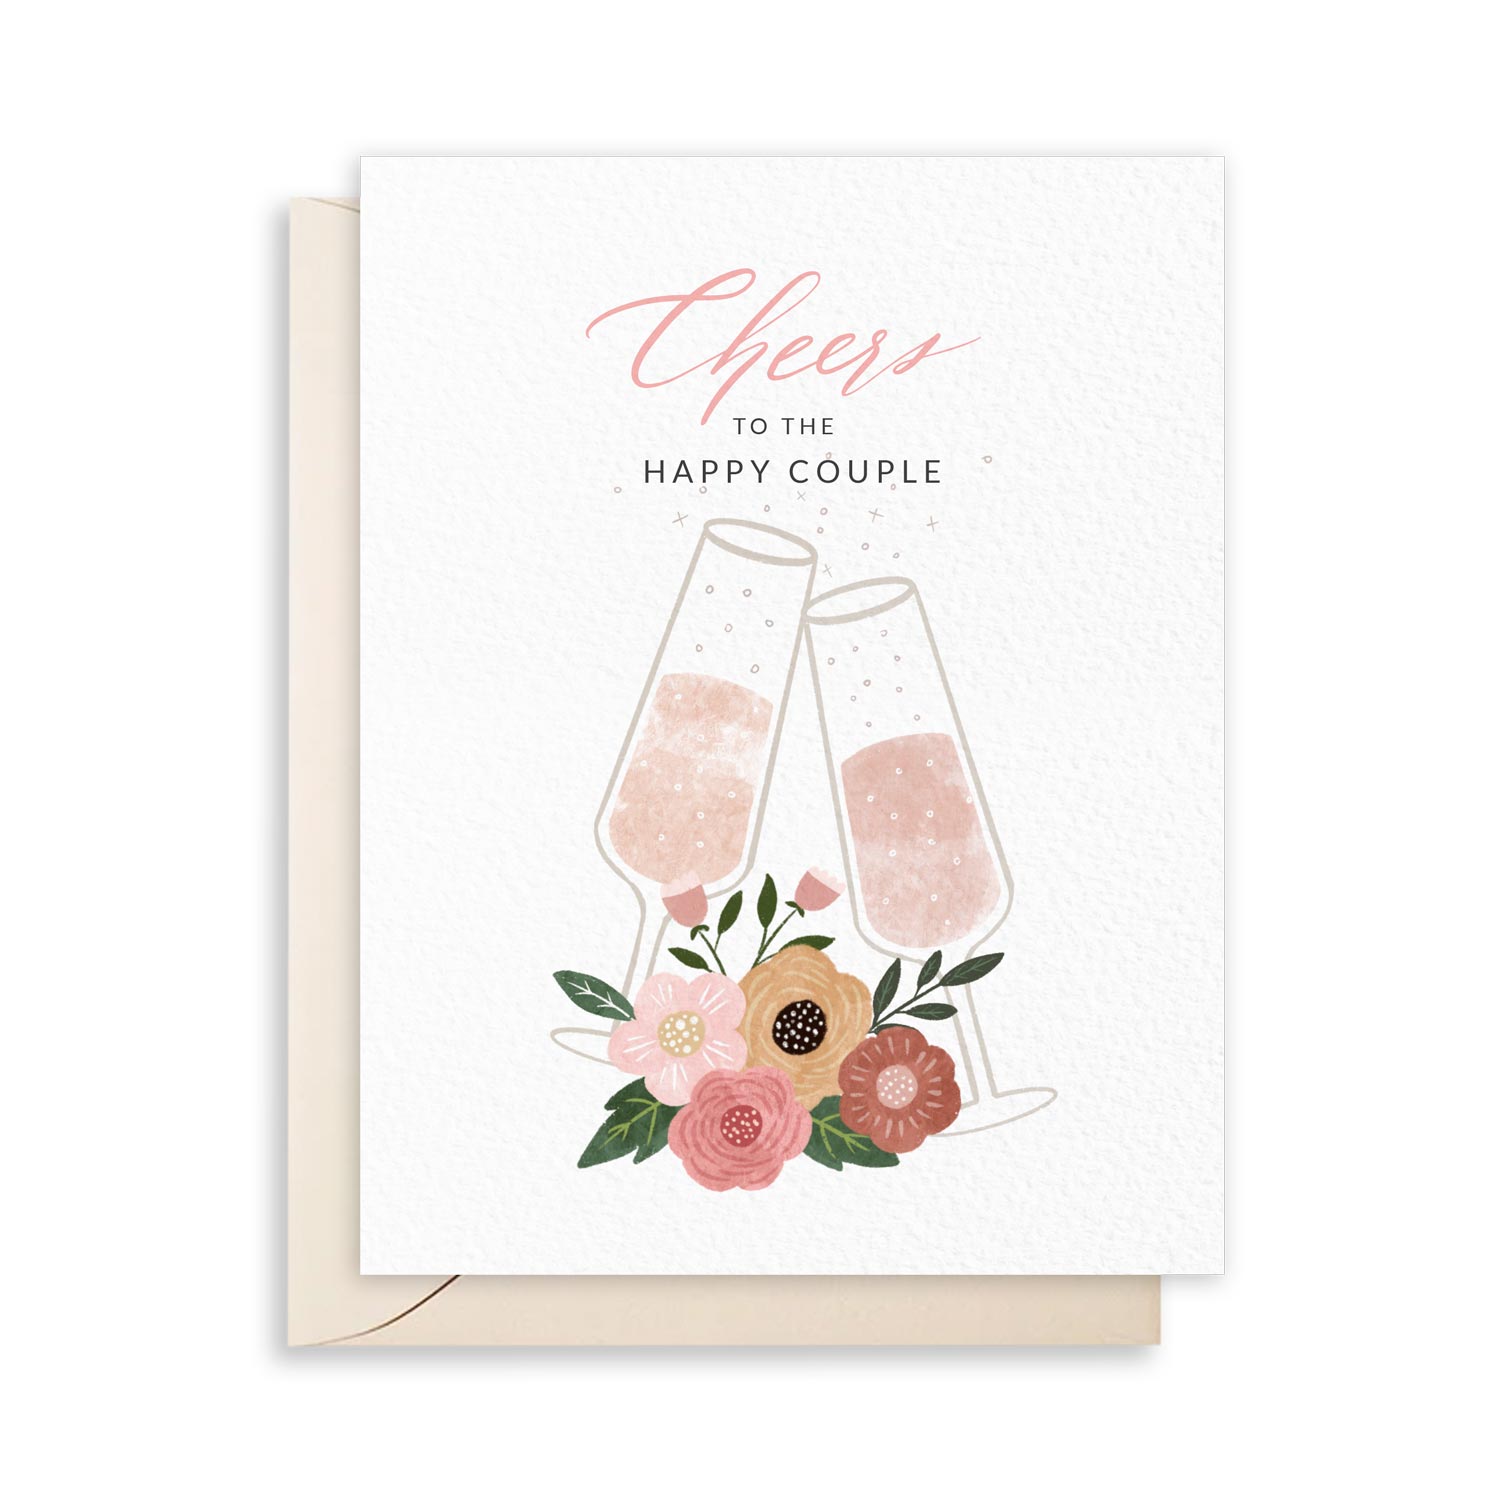 cheers to the happy couple wedding greeting card